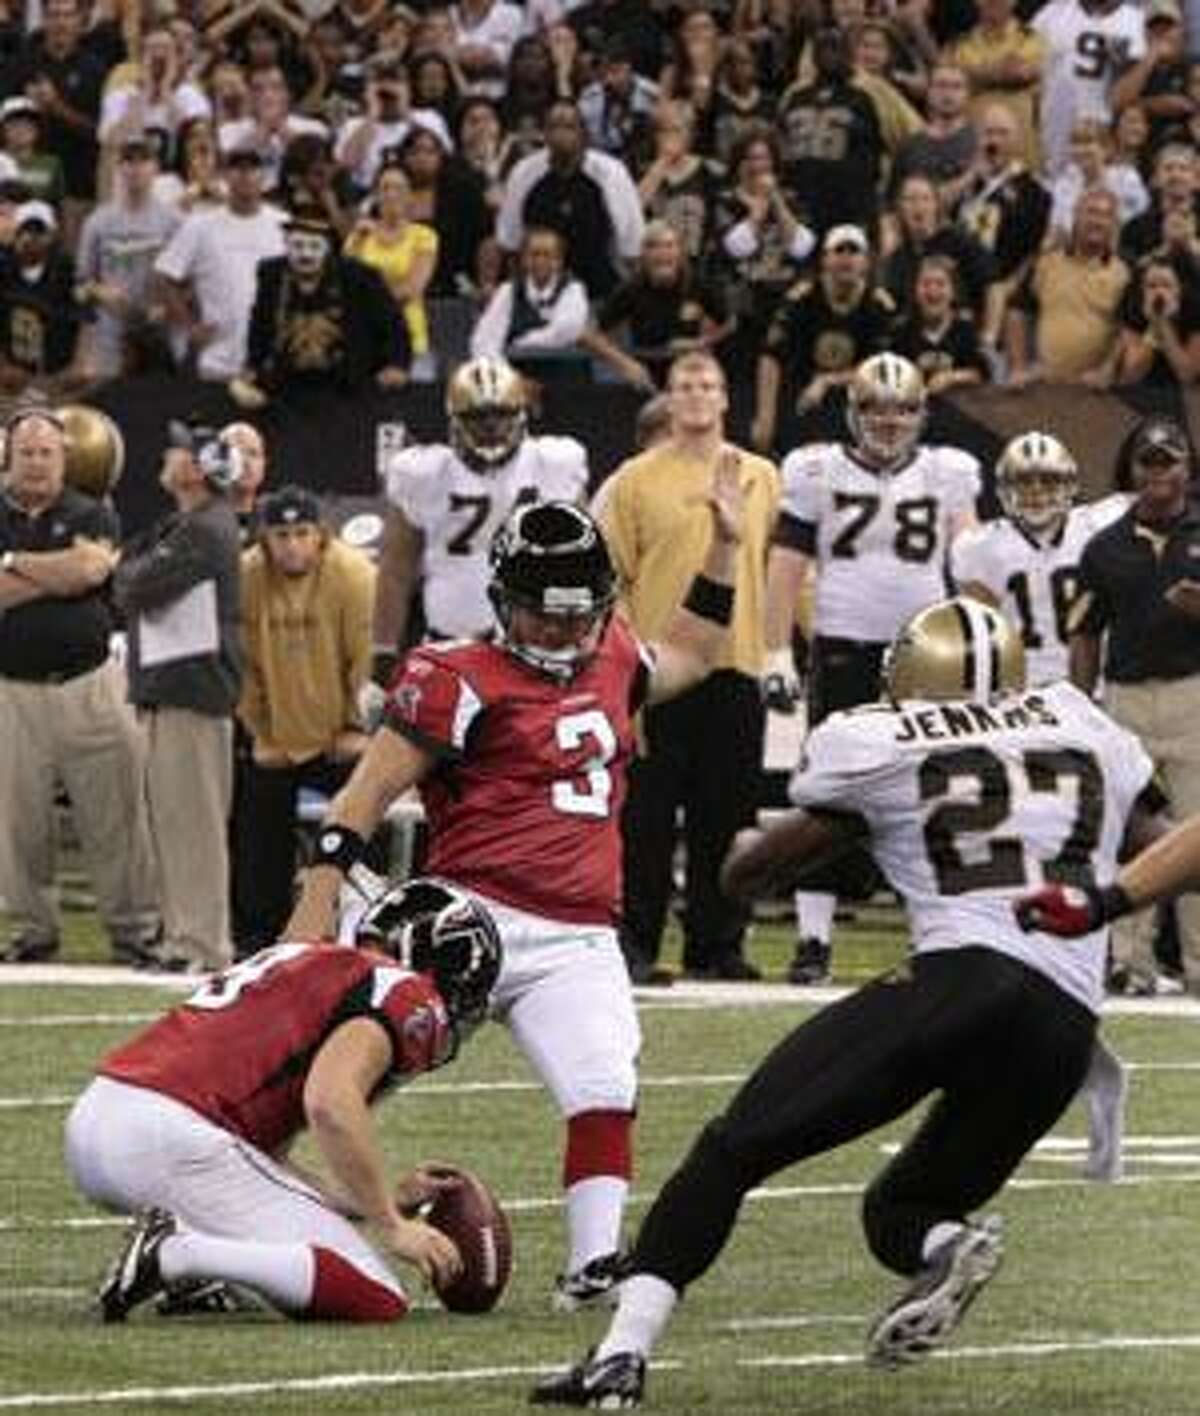 Atlanta Falcons place kicker Matt Bryant (3) kicks the game winning field goal over the New Orleans Saints in overtime of their NFL football game at the Louisiana Superdome in New Orleans, La., Sunday, Sept. 26, 2010. The Falcons won 27-24. (AP Photo/Bill Haber)